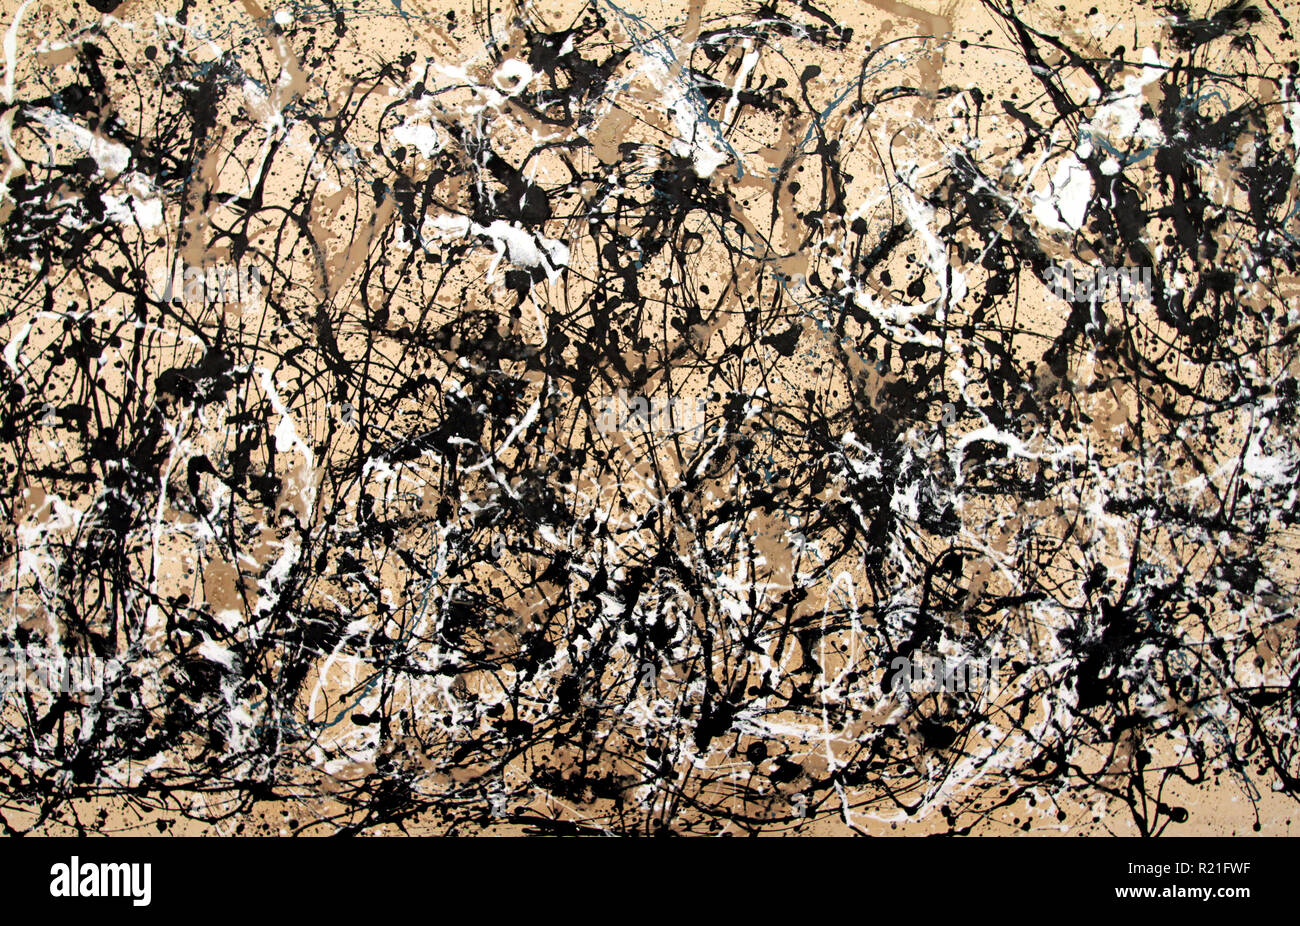 This Jackson Pollock painting is called 'Autumn Rhythm' and hangs in the Metropolitan Museum of Art in New York. Stock Photo